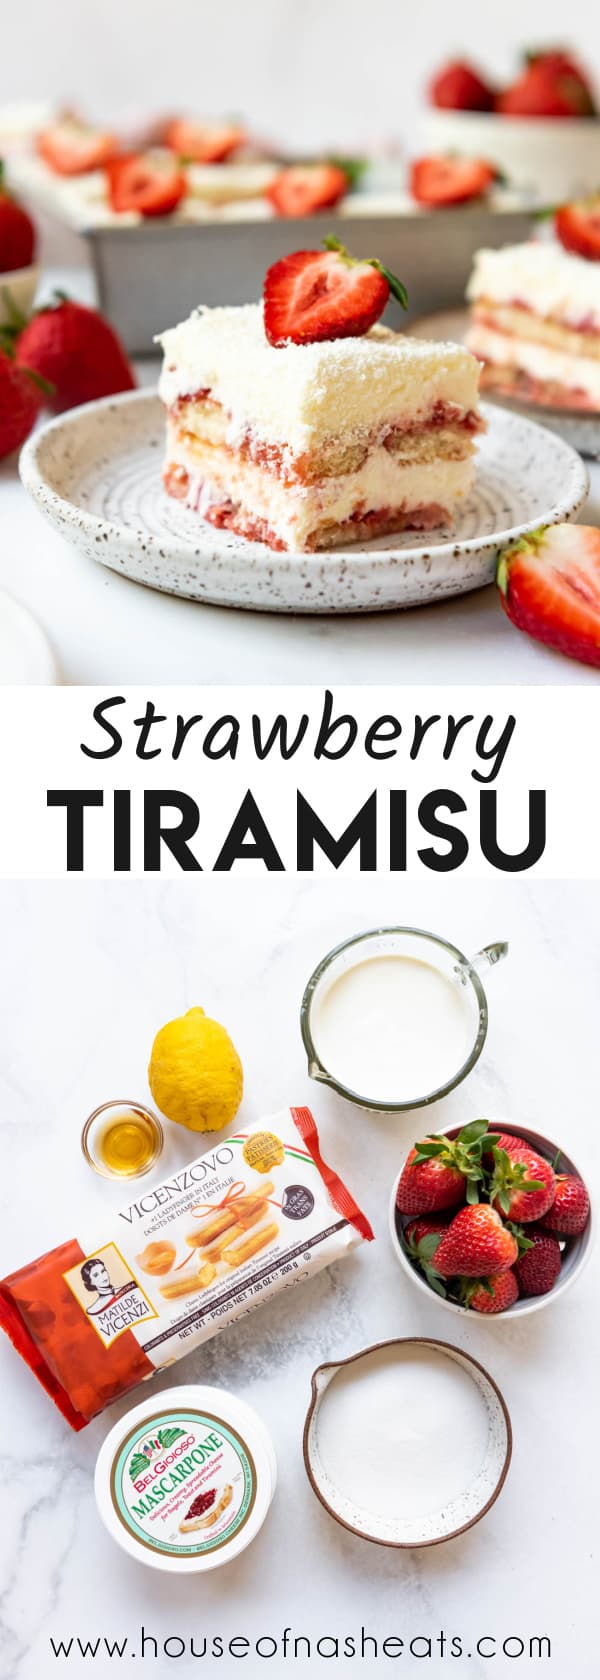 A collage of images of strawberry tiramisu with text overlay.